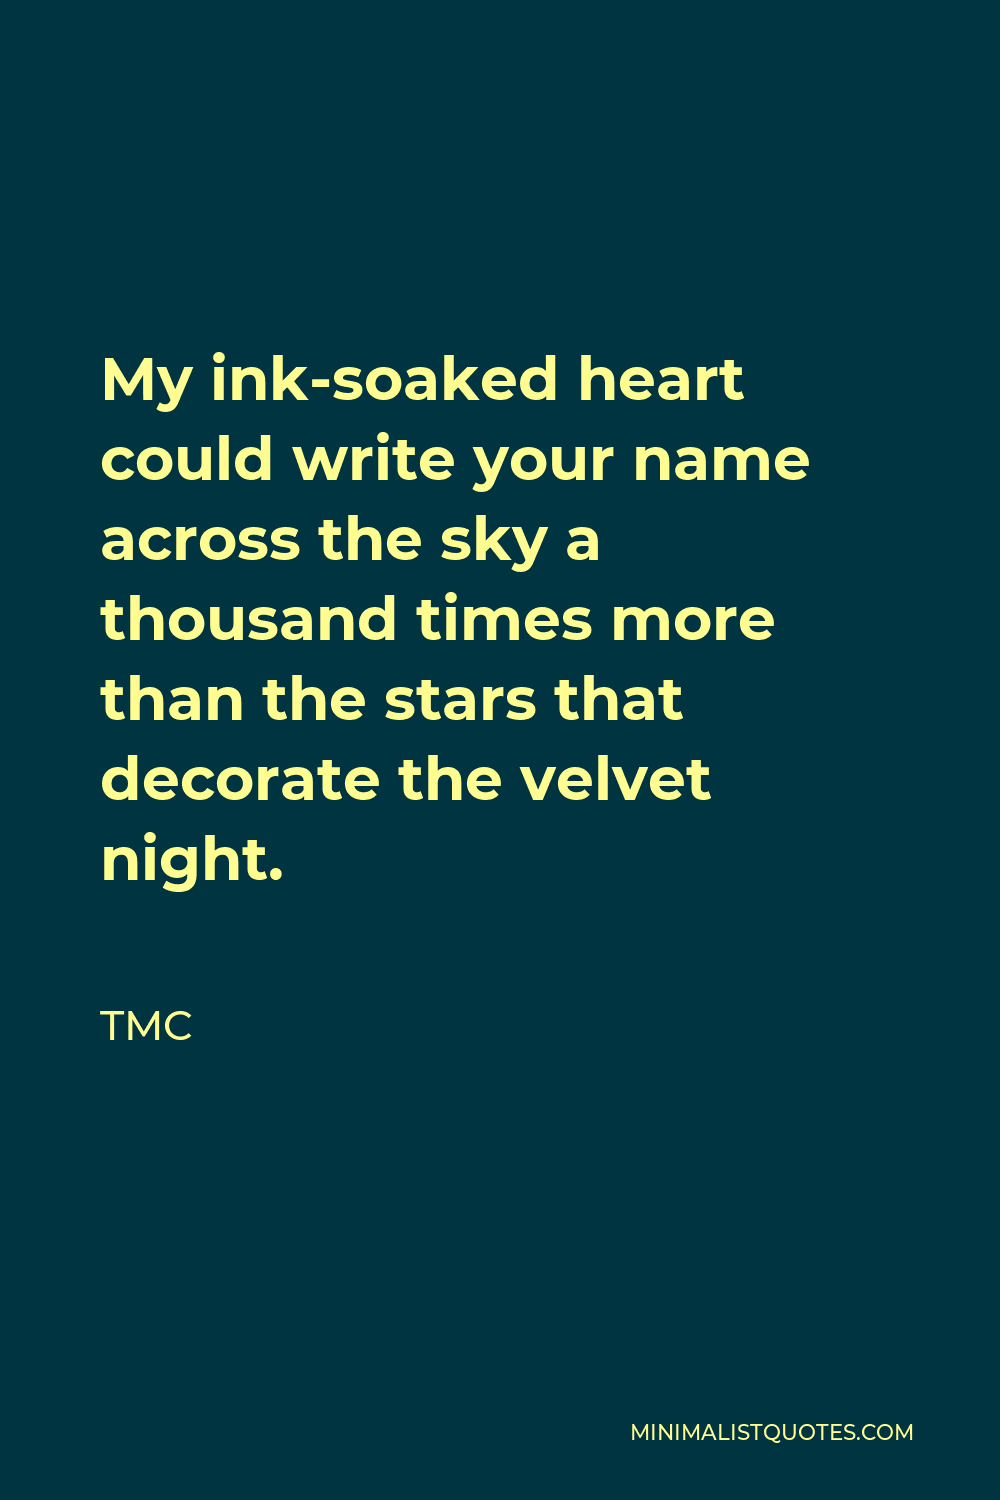 TMC Quote - My ink-soaked heart could write your name across the sky a thousand times more than the stars that decorate the velvet night.